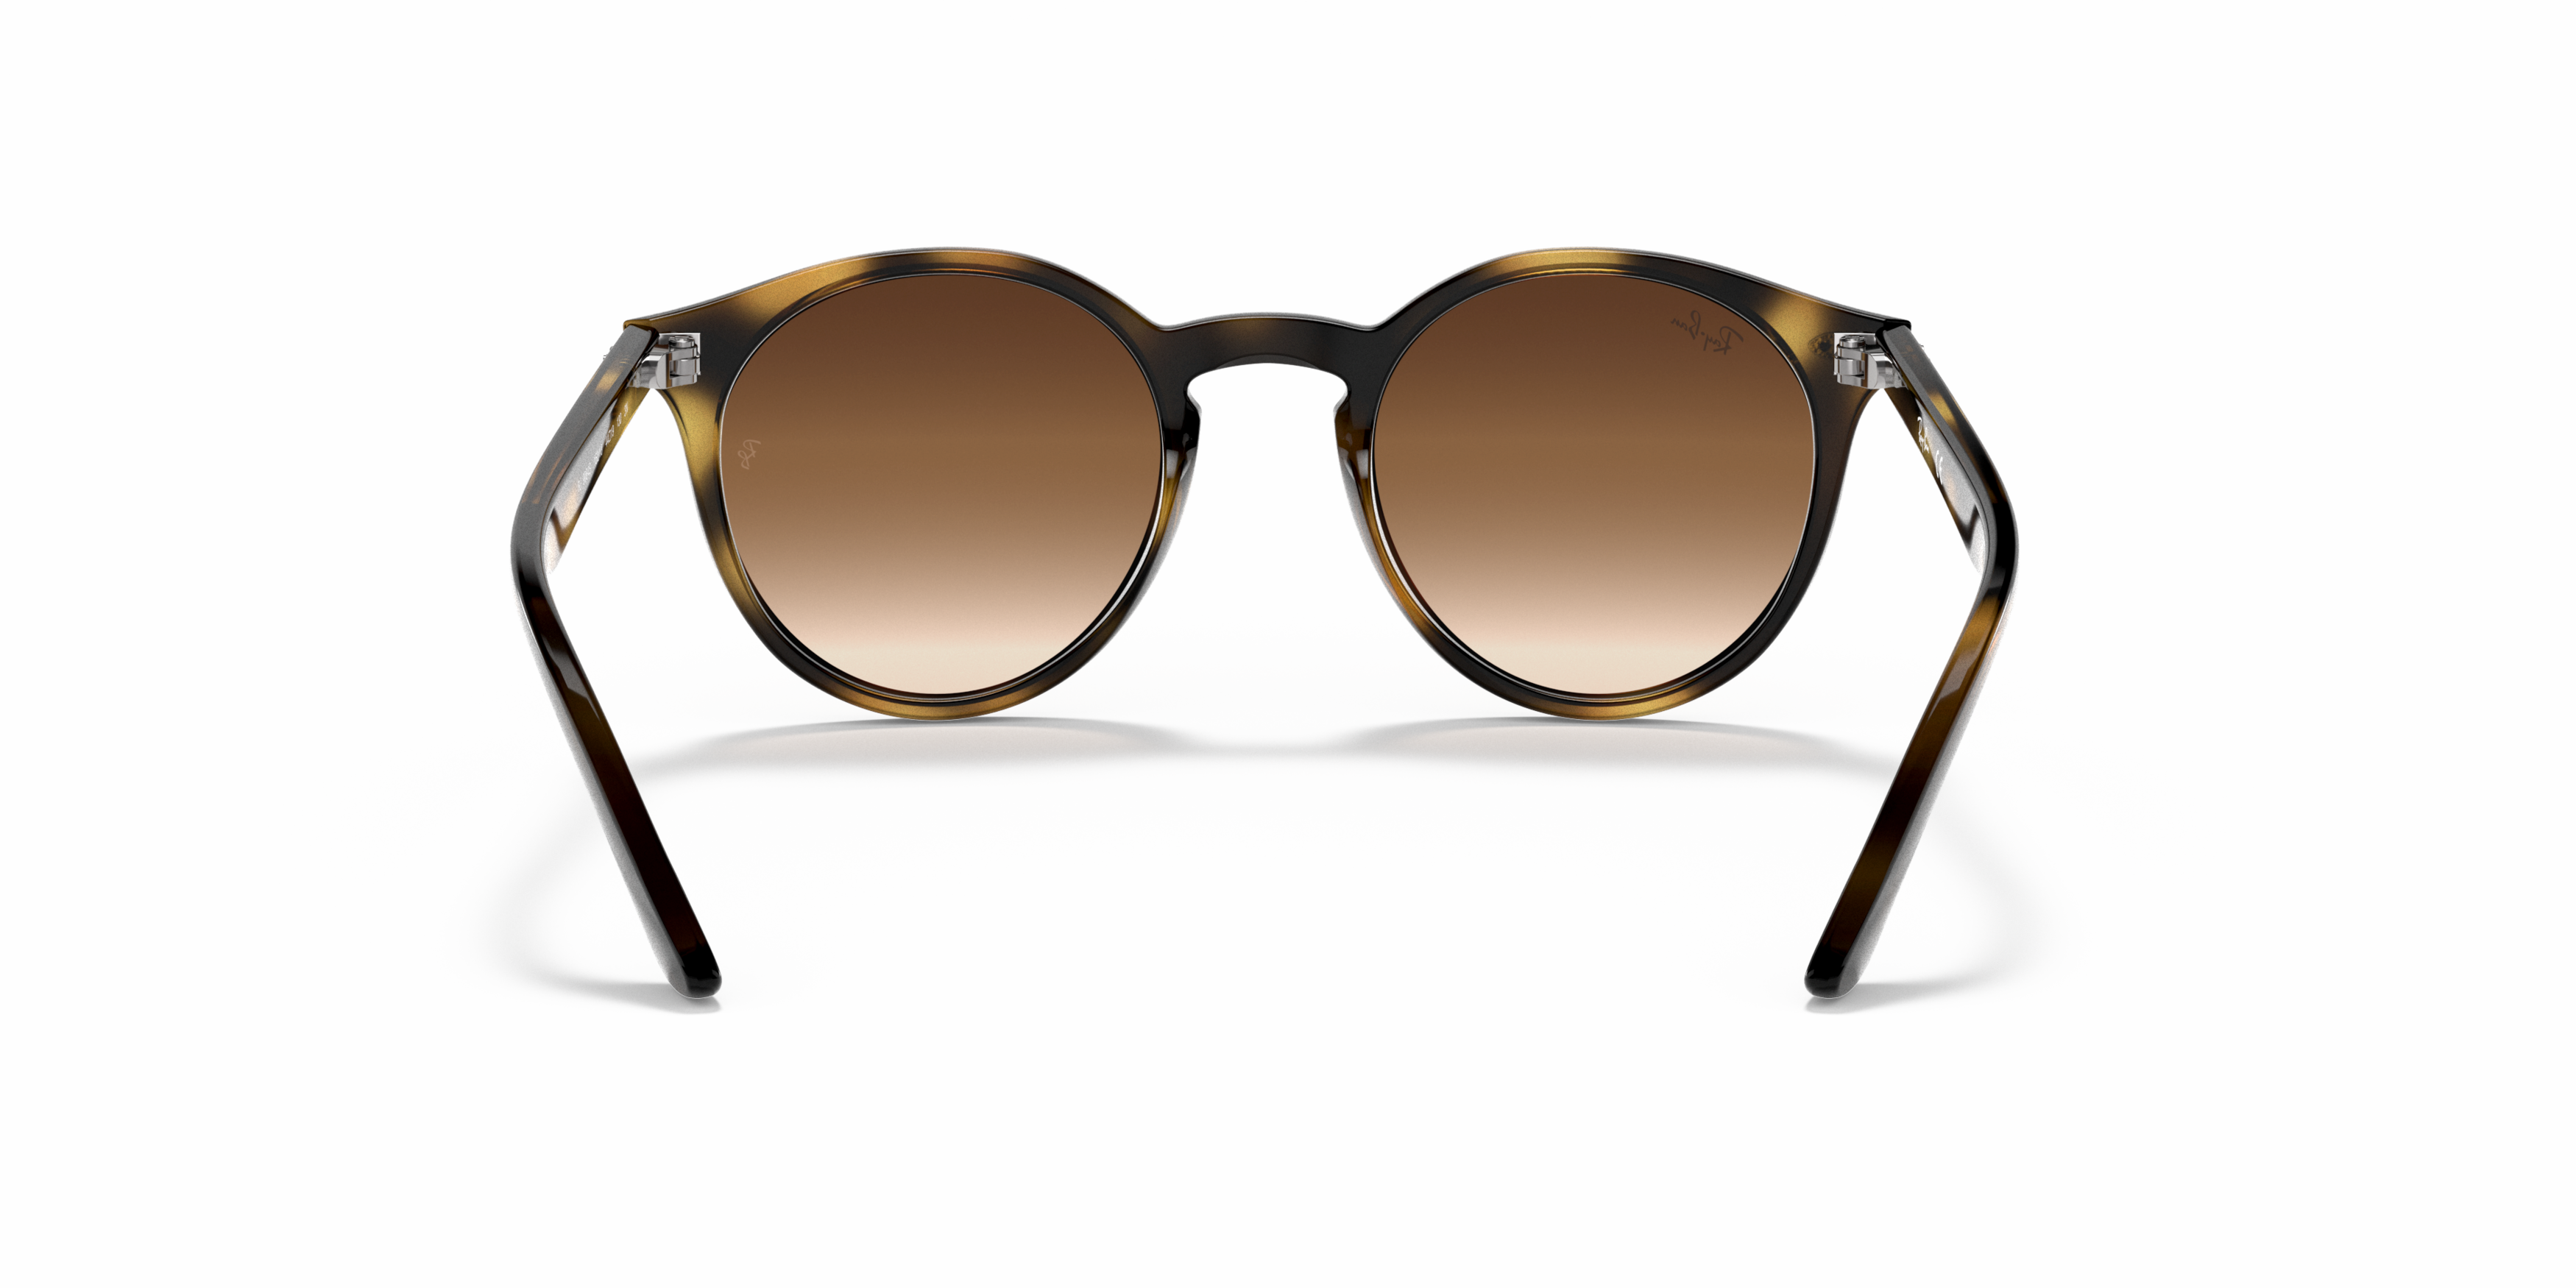 [products.image.detail02] RAY-BAN RJ9064S 152/13